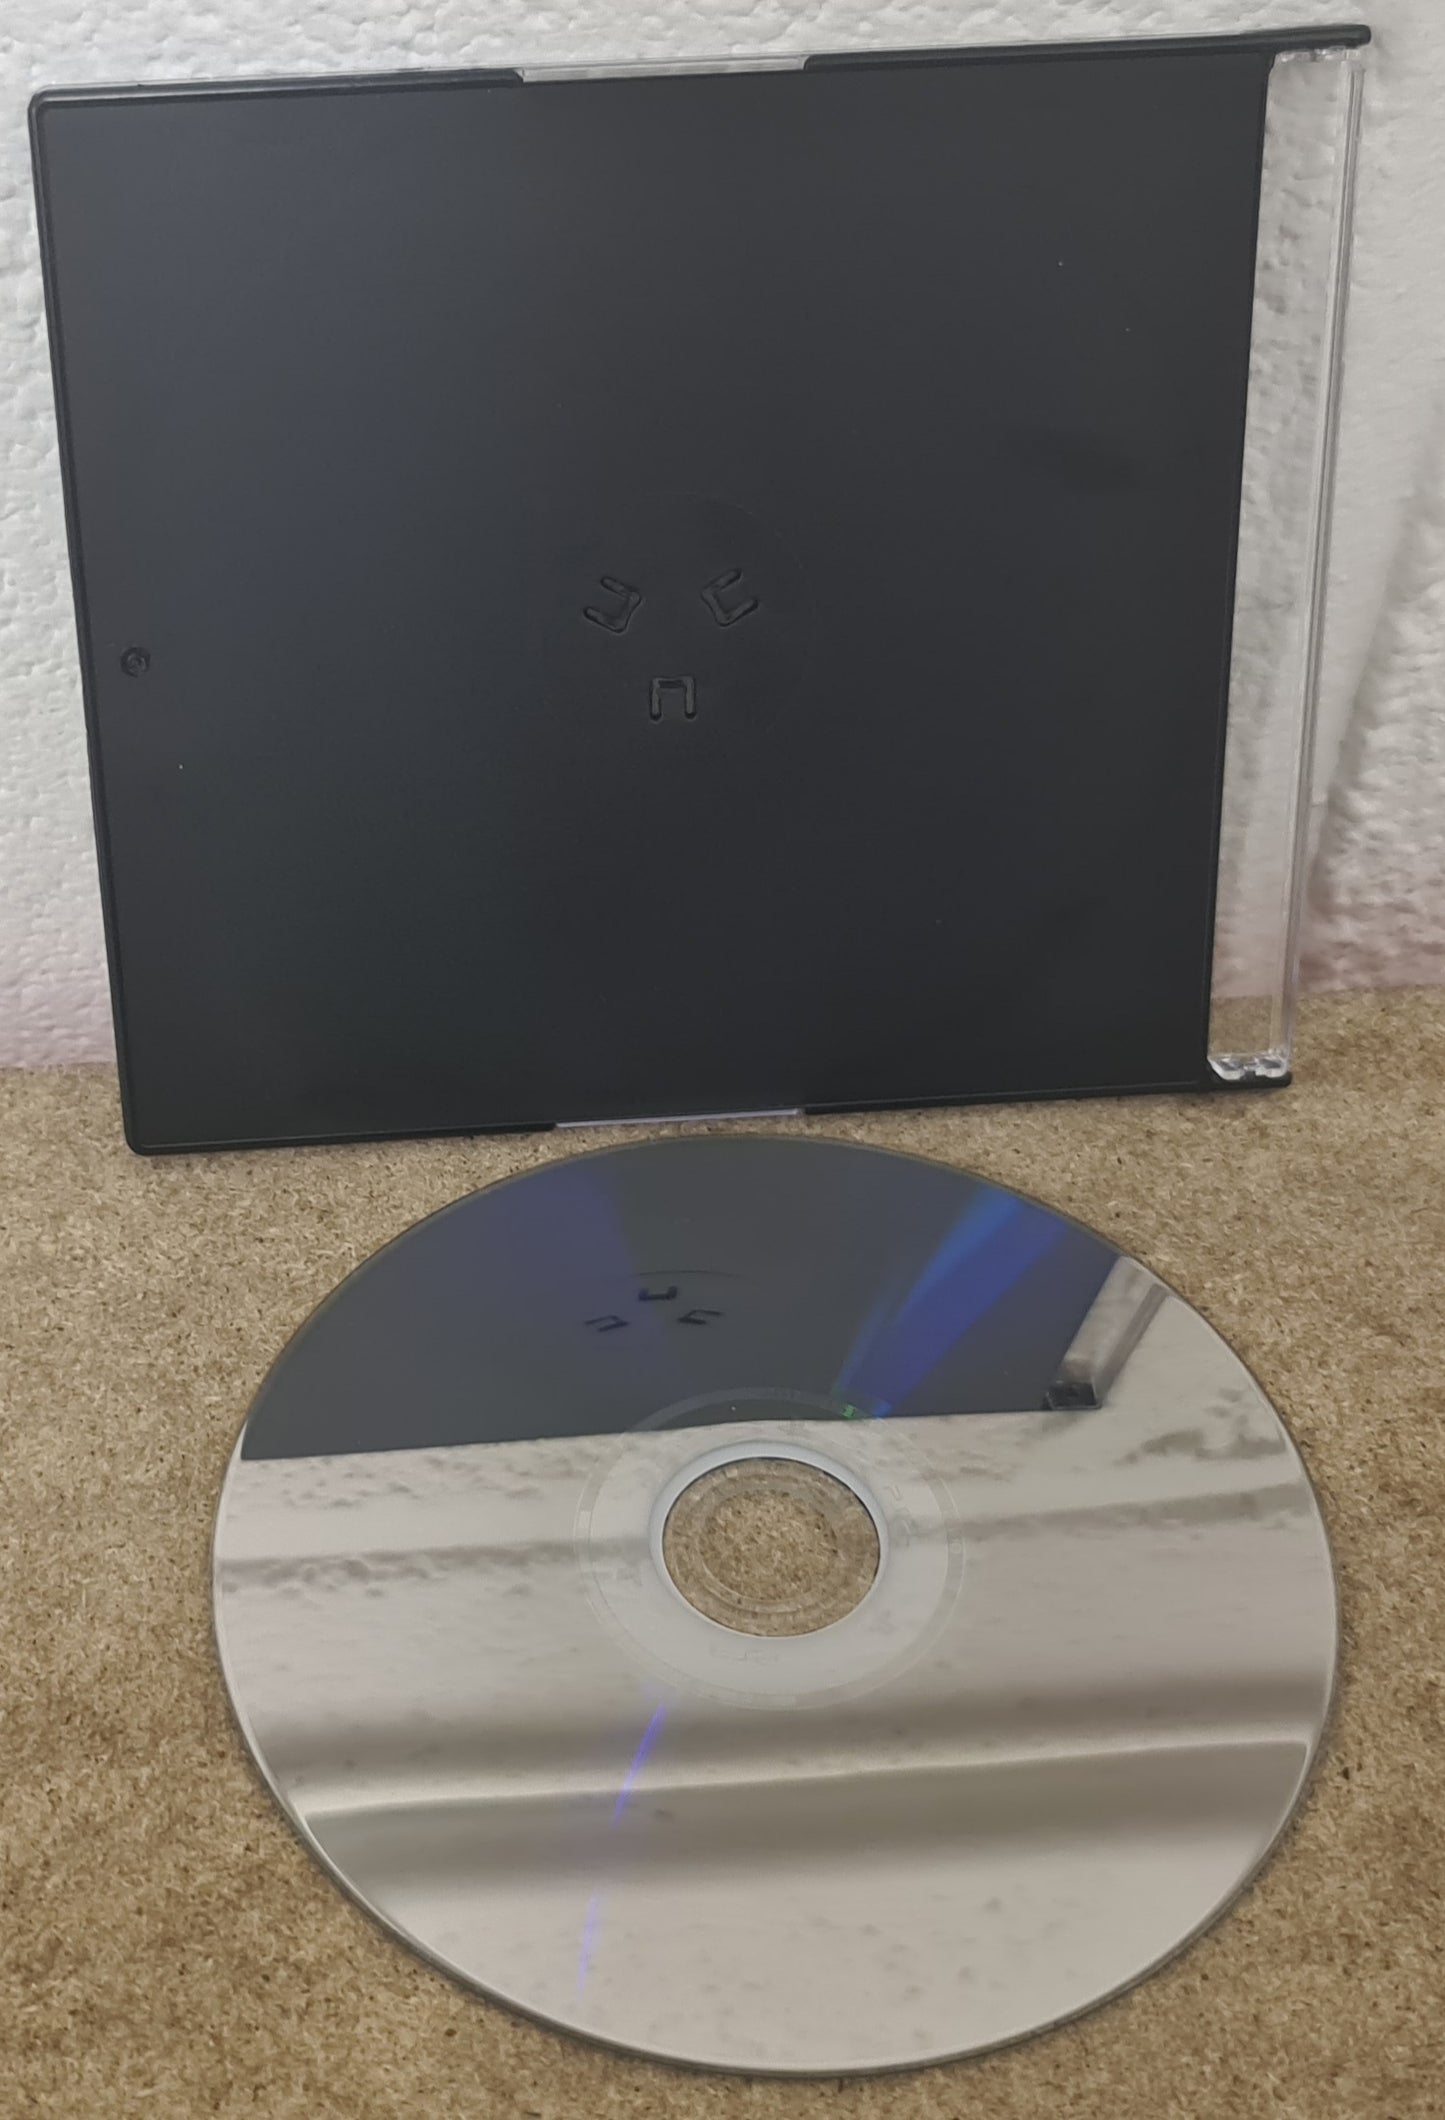 A Realm Reborn Final Fantasy XIV Sony Playstation 3 (PS3) Game Disc Only